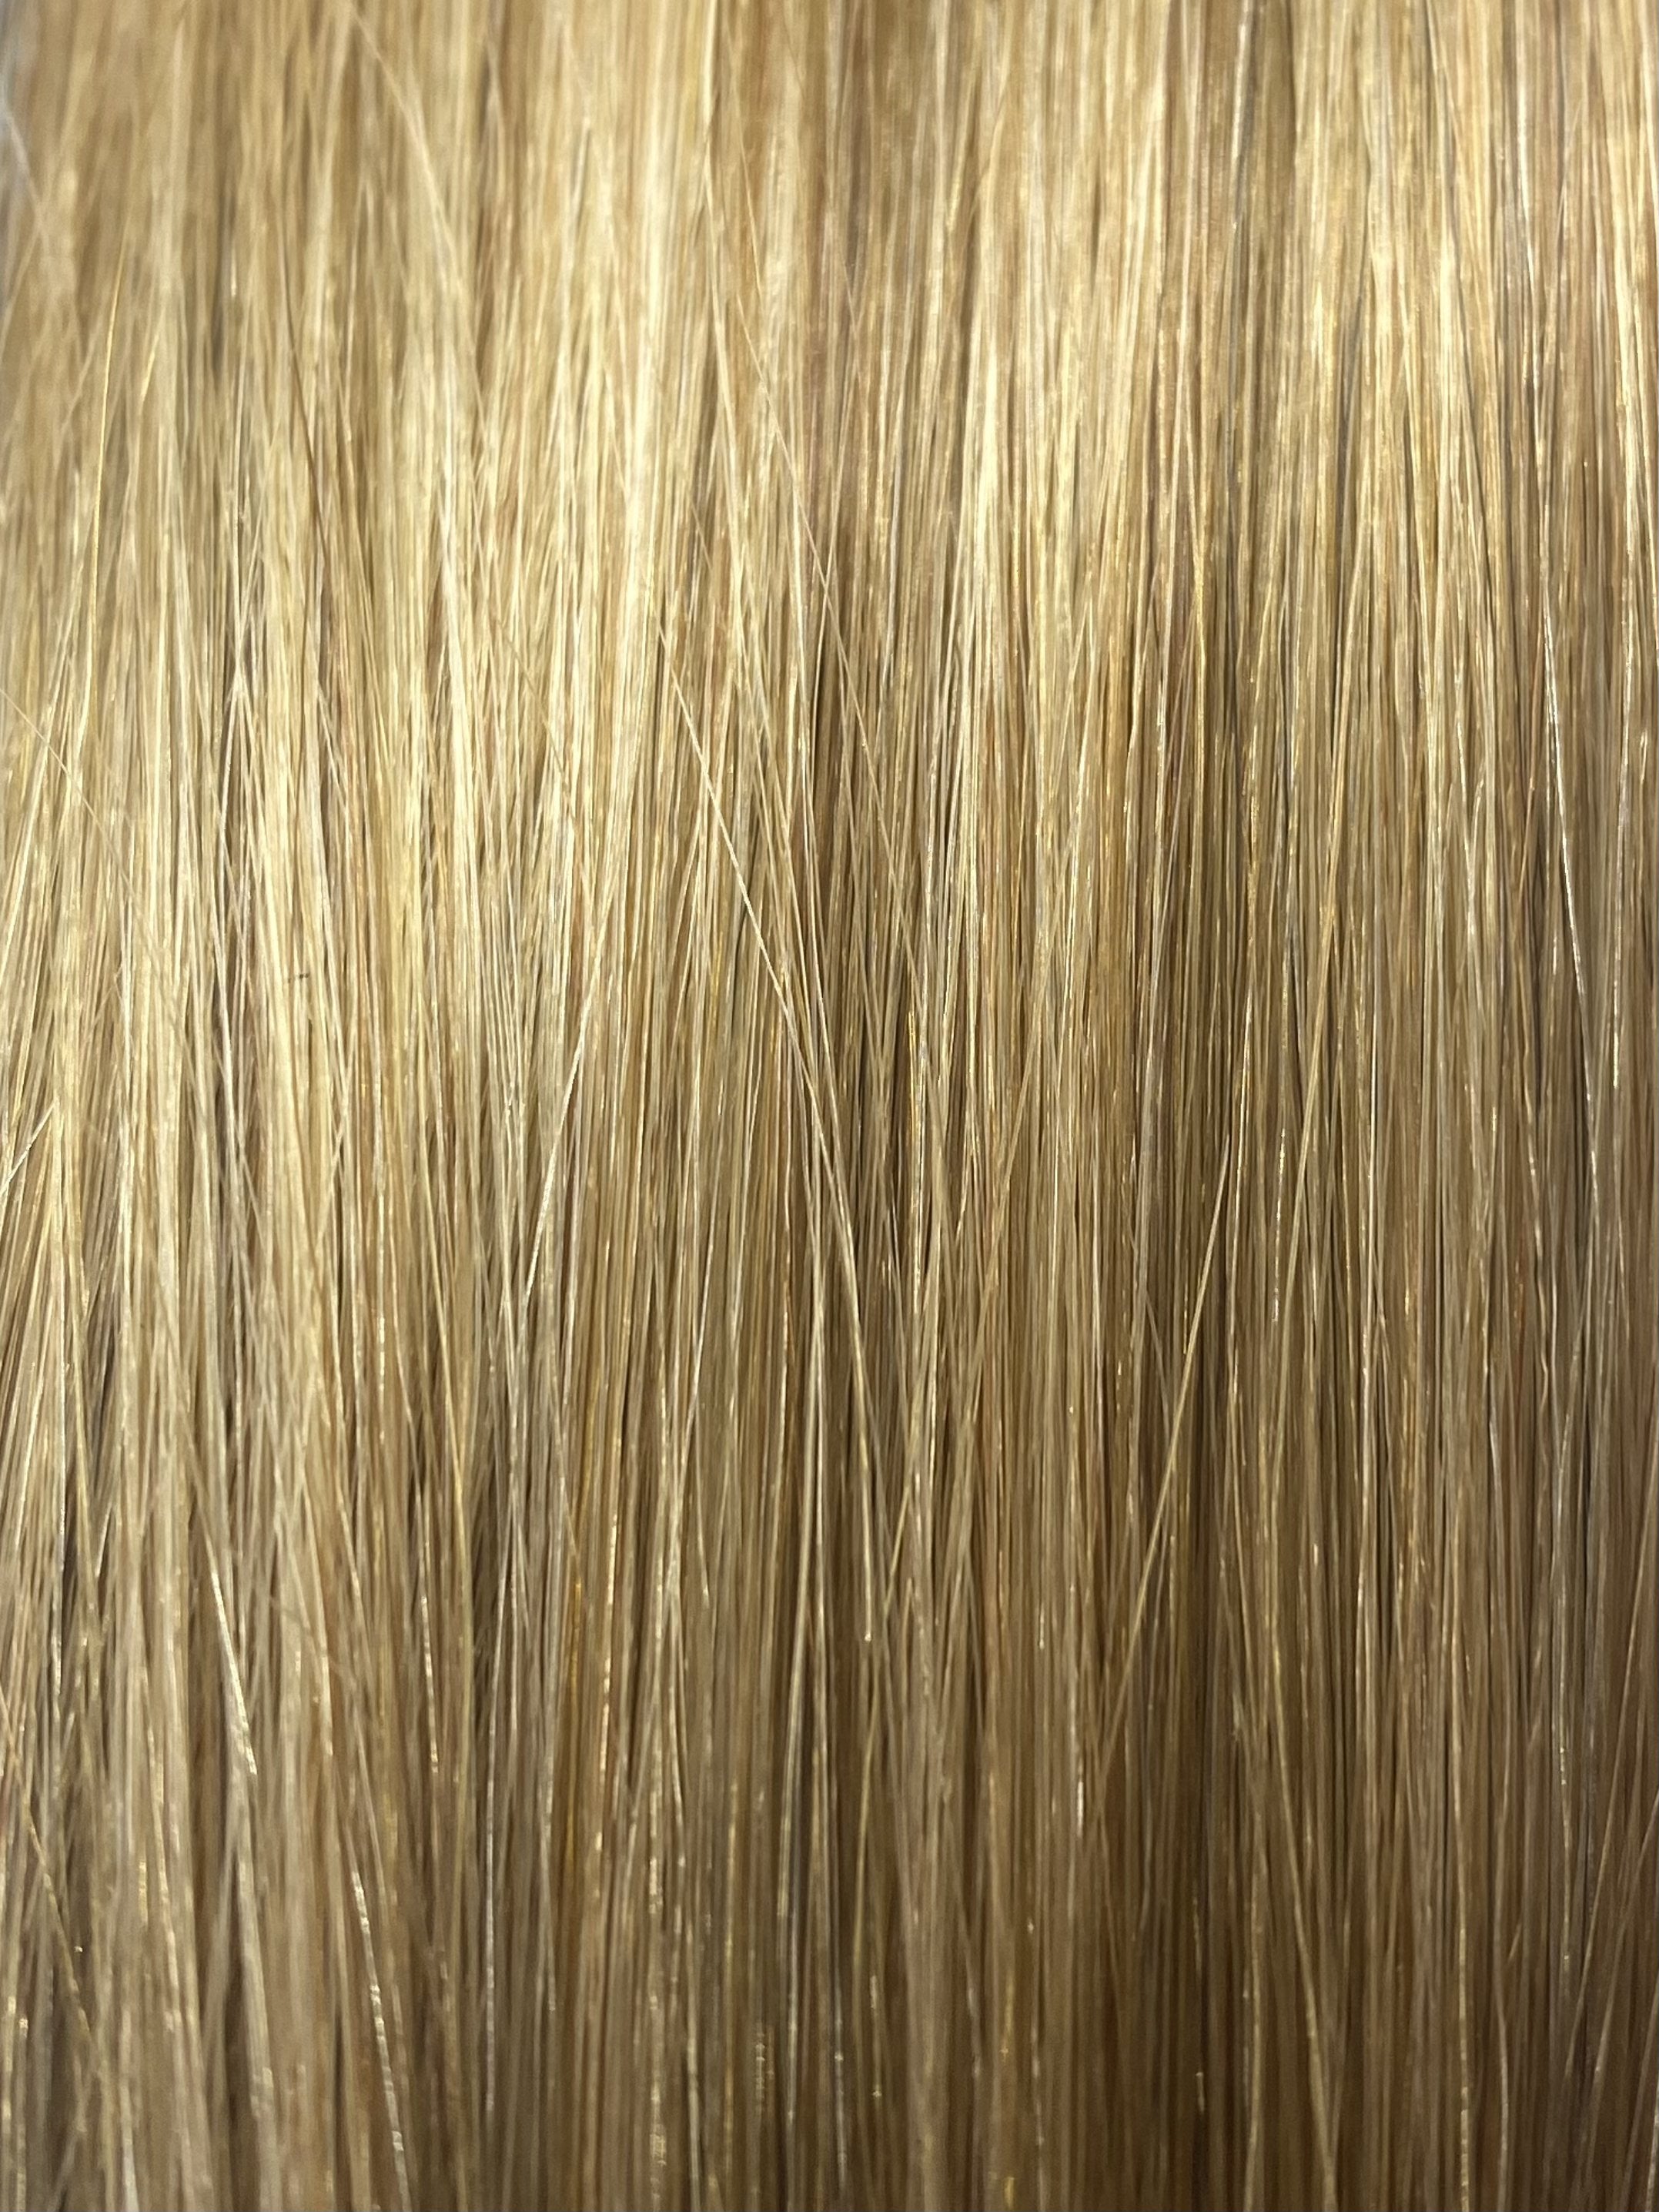 FUSION HIGHLIGHT #12/DB2 LIGHT/COPPER GOLDEN BLONDE 50CM/ 20 INCHES  -  20 GRAMS - Image 1